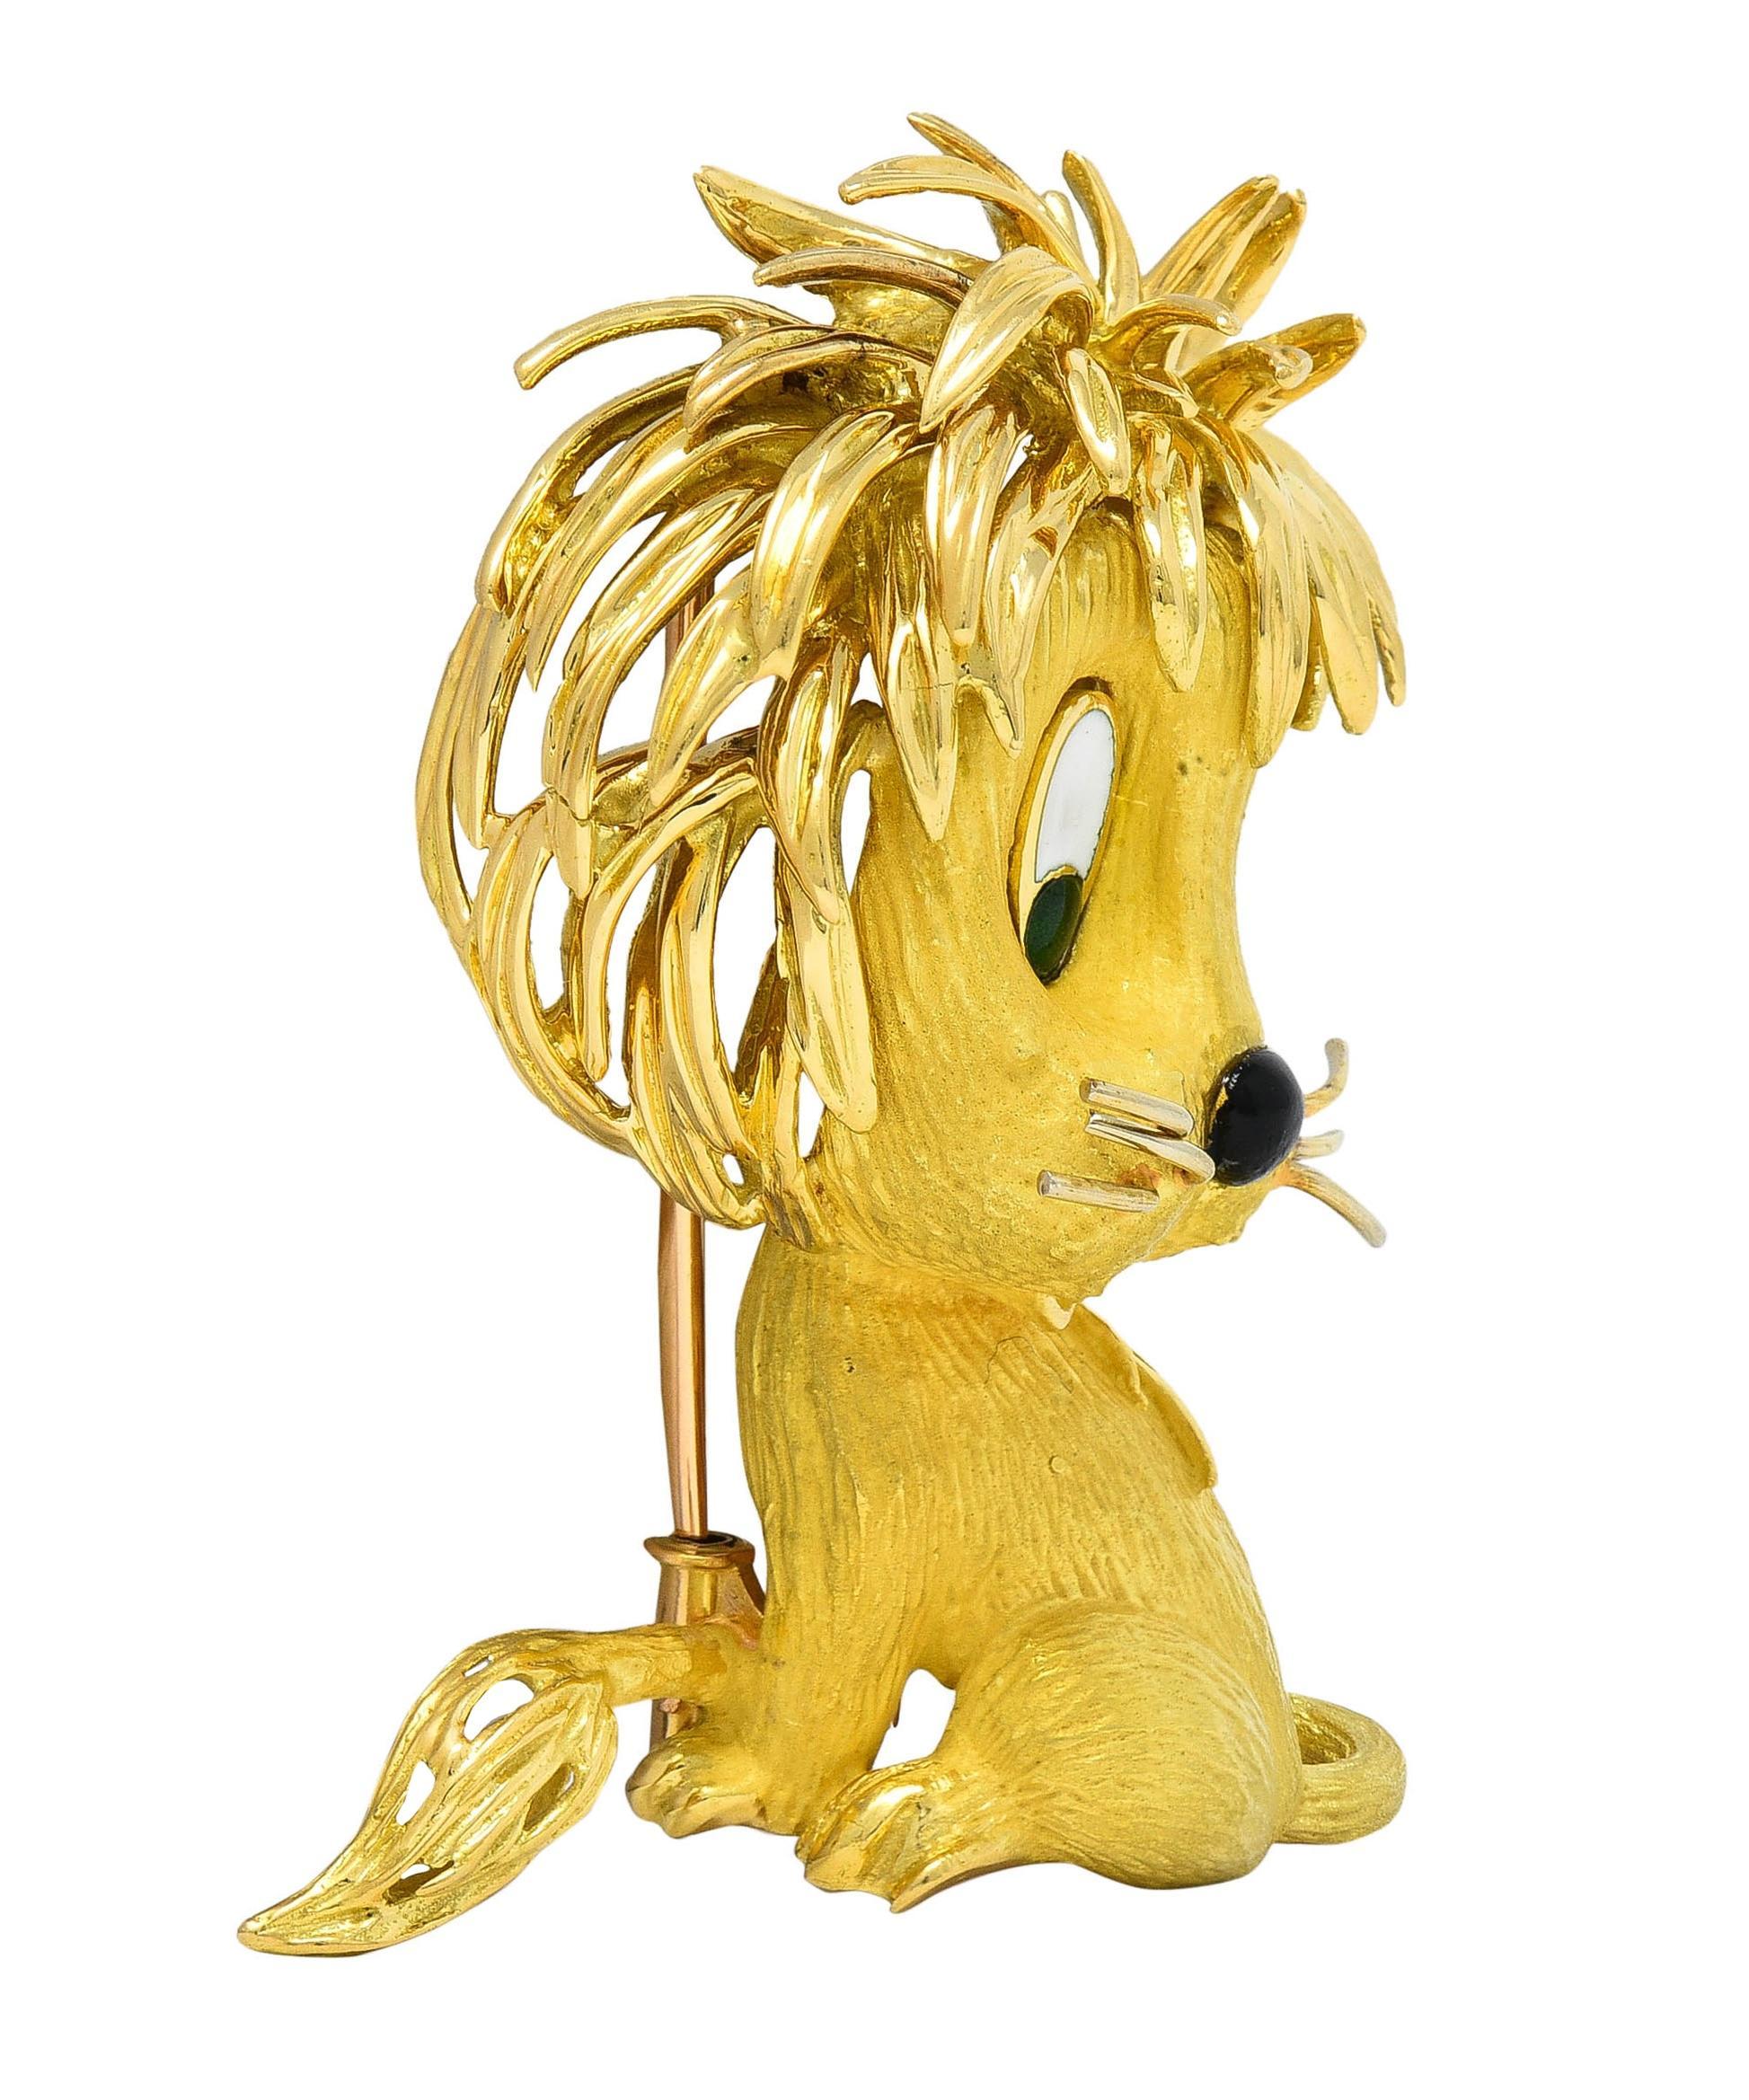 Designed as a stylized, whimsical lion sitting with ruffled tendril mane and textured fur
Featuring enamel eyes and nose - opaque black, opaque white, and transparent green
Body fur is matte, while mane, tail, smile, and whiskers are high